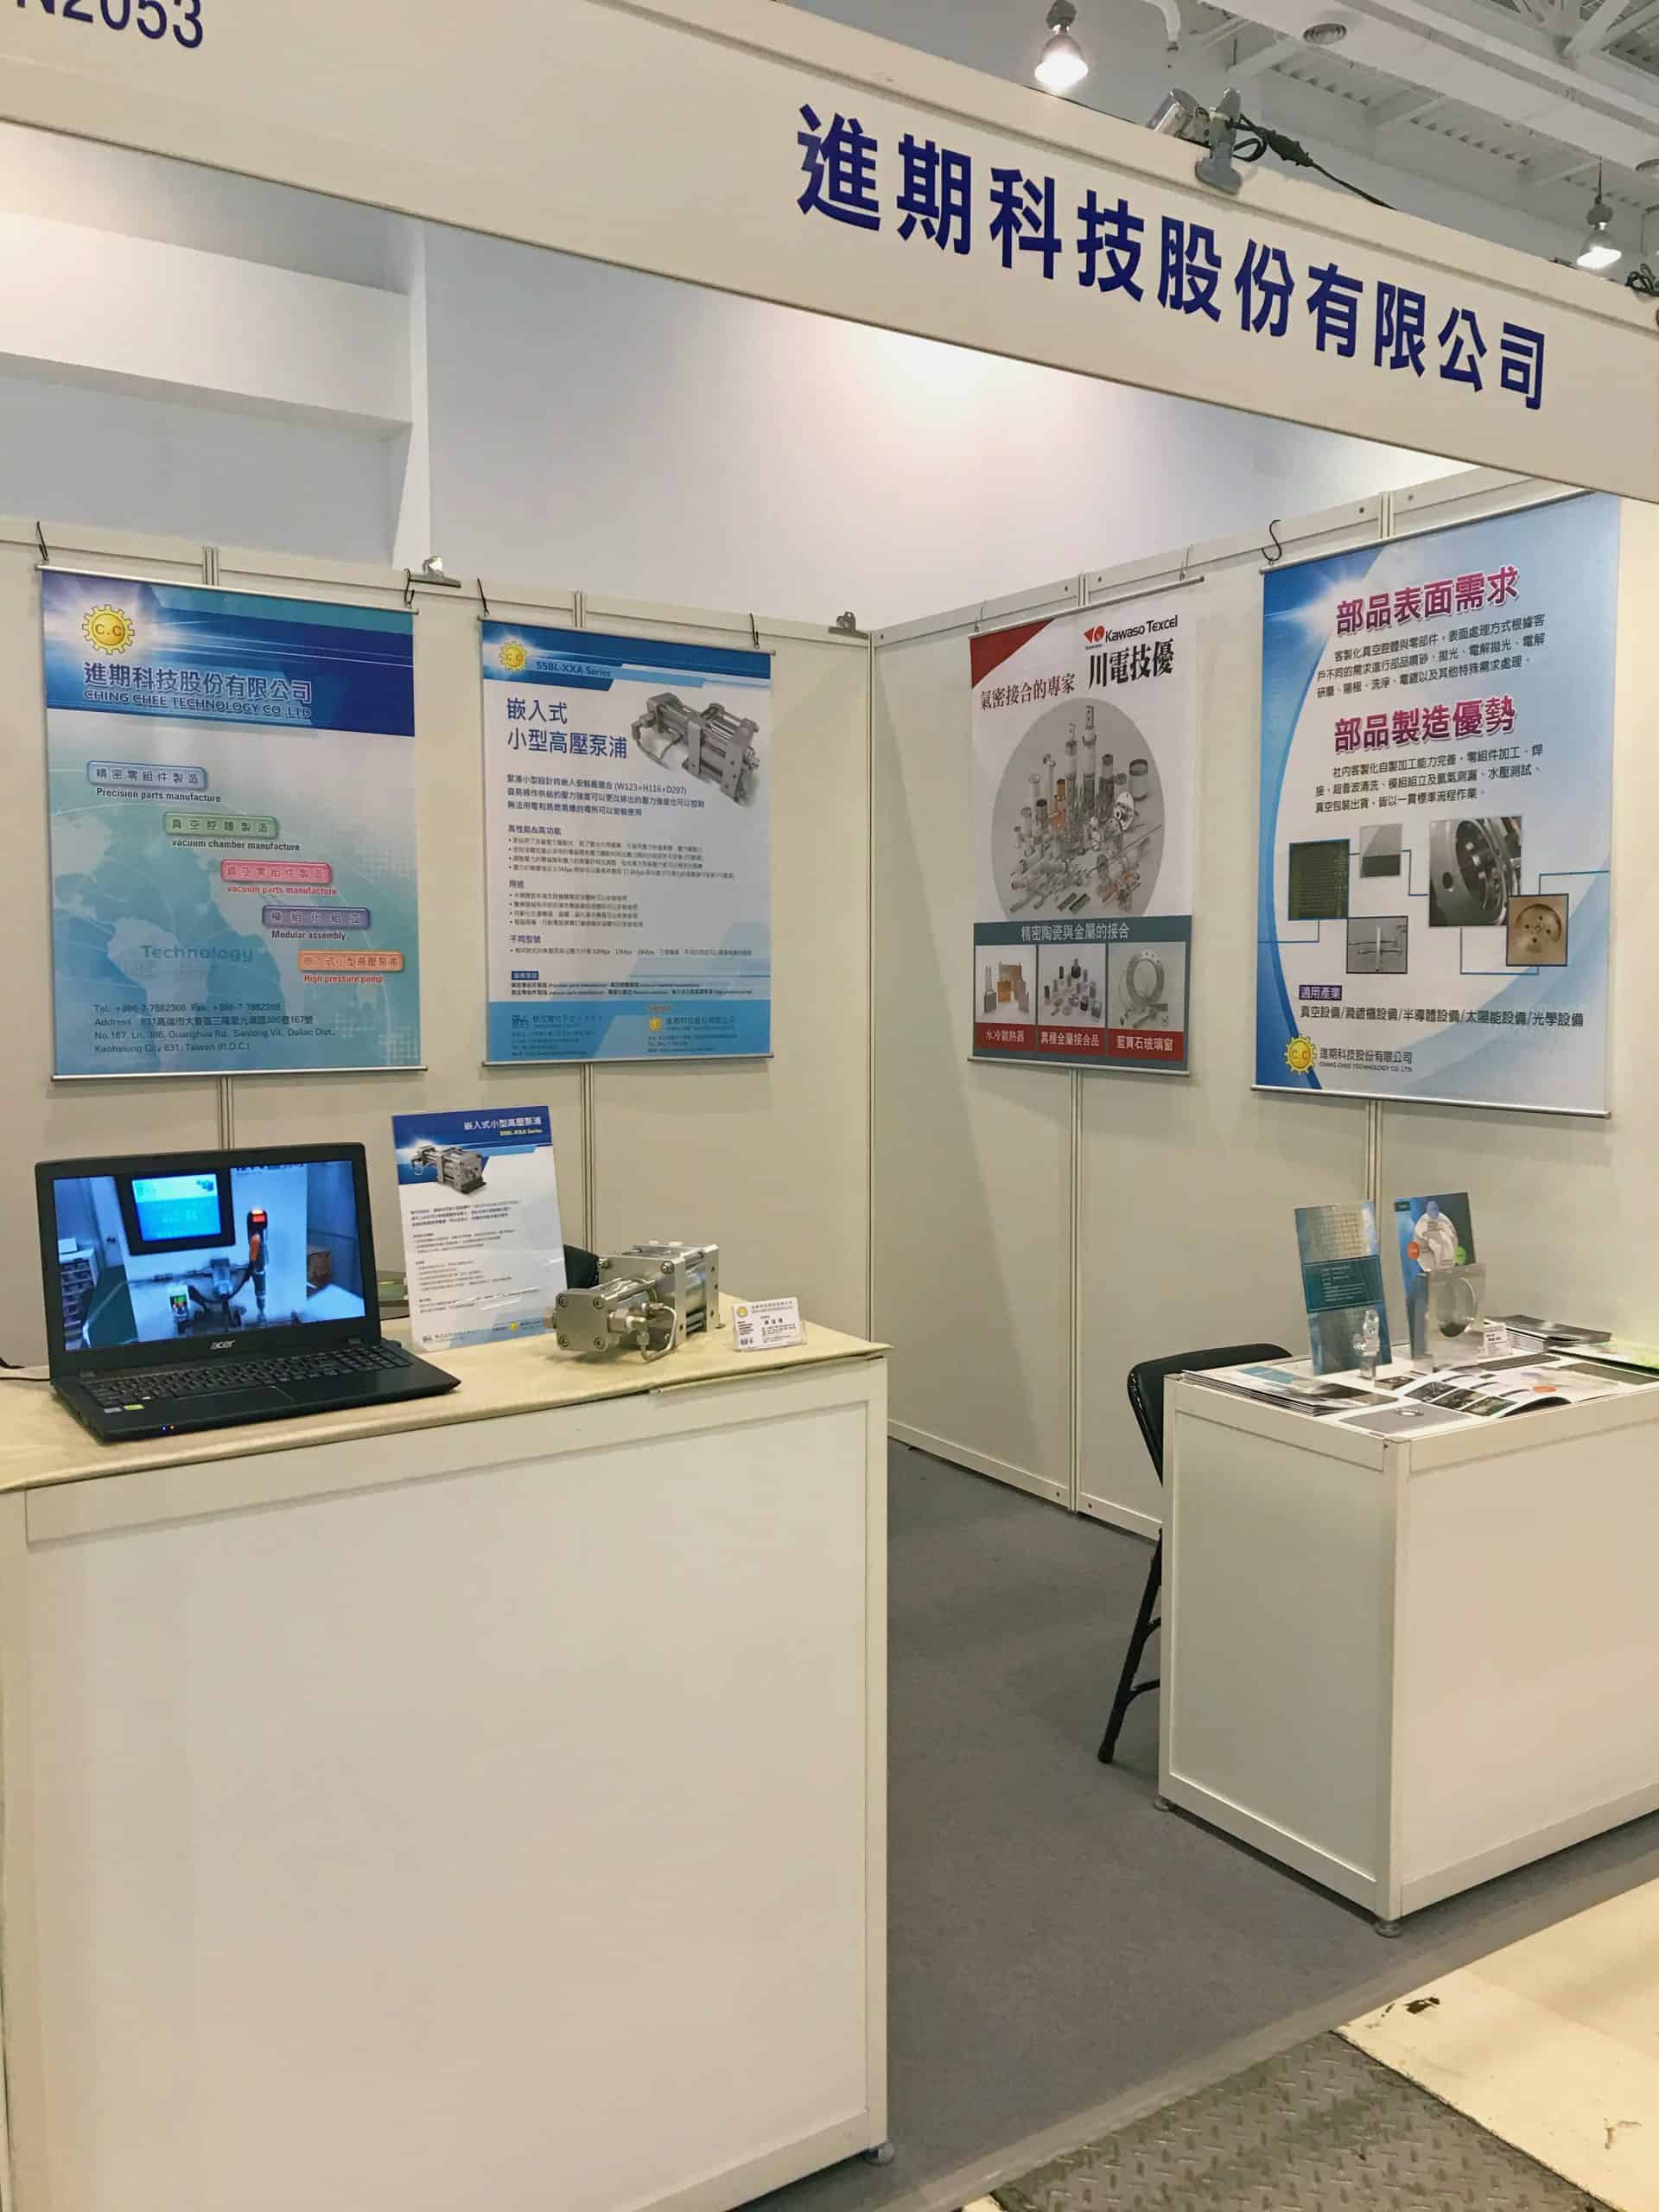 2020 Kaohsiung Automation Industry Exhibition & Kaohsiung Chemical Instrument Exhibition 2020.8.6 (Thursday) ~ 8.9 (Sunday) 2